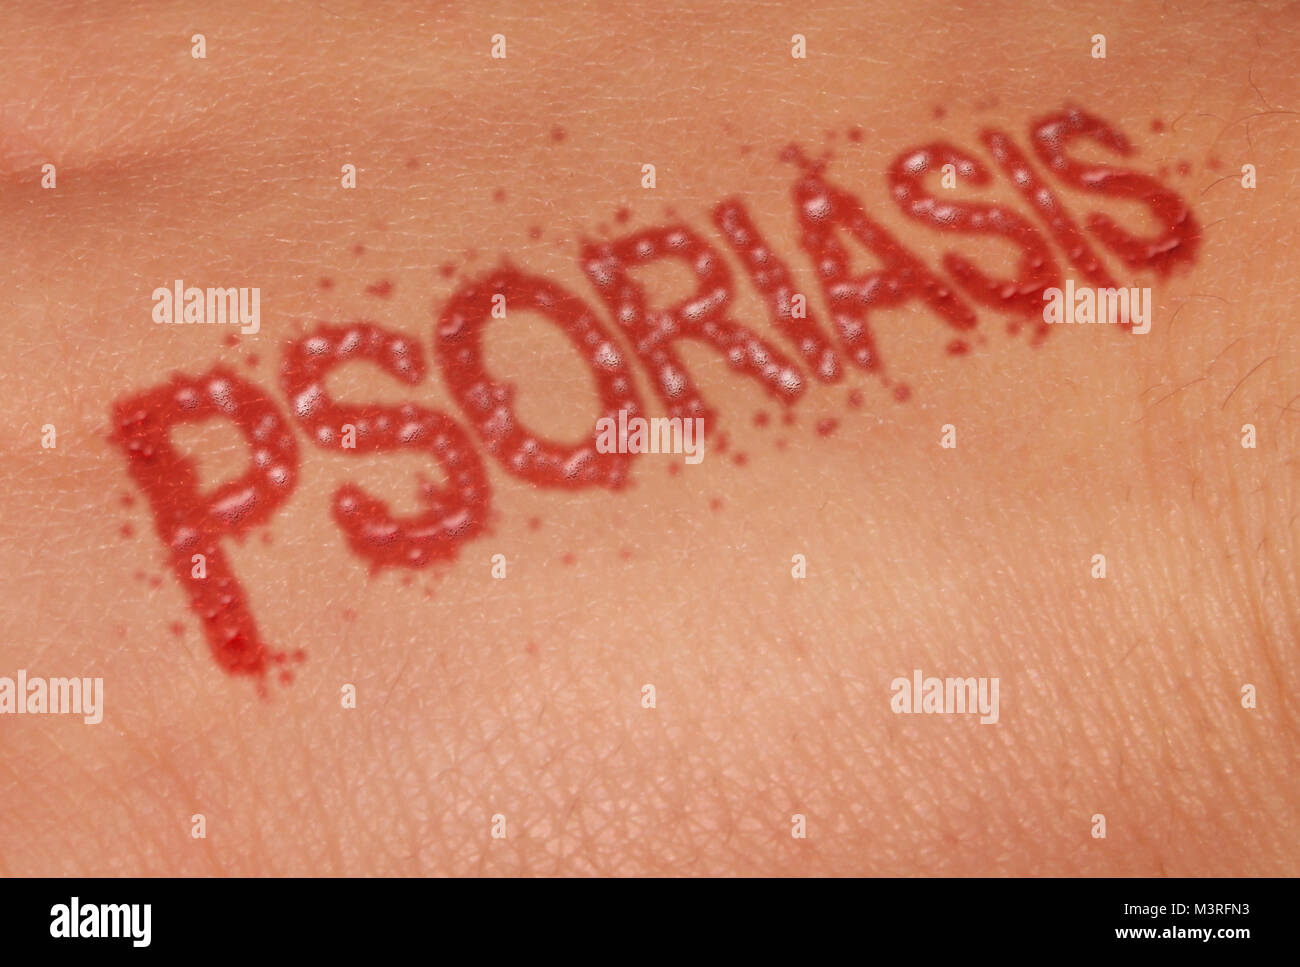 Psoriasis autoimmune disease as dry red skin patches as a symbol for dermatology illness in a 3D illustration style. Stock Photo